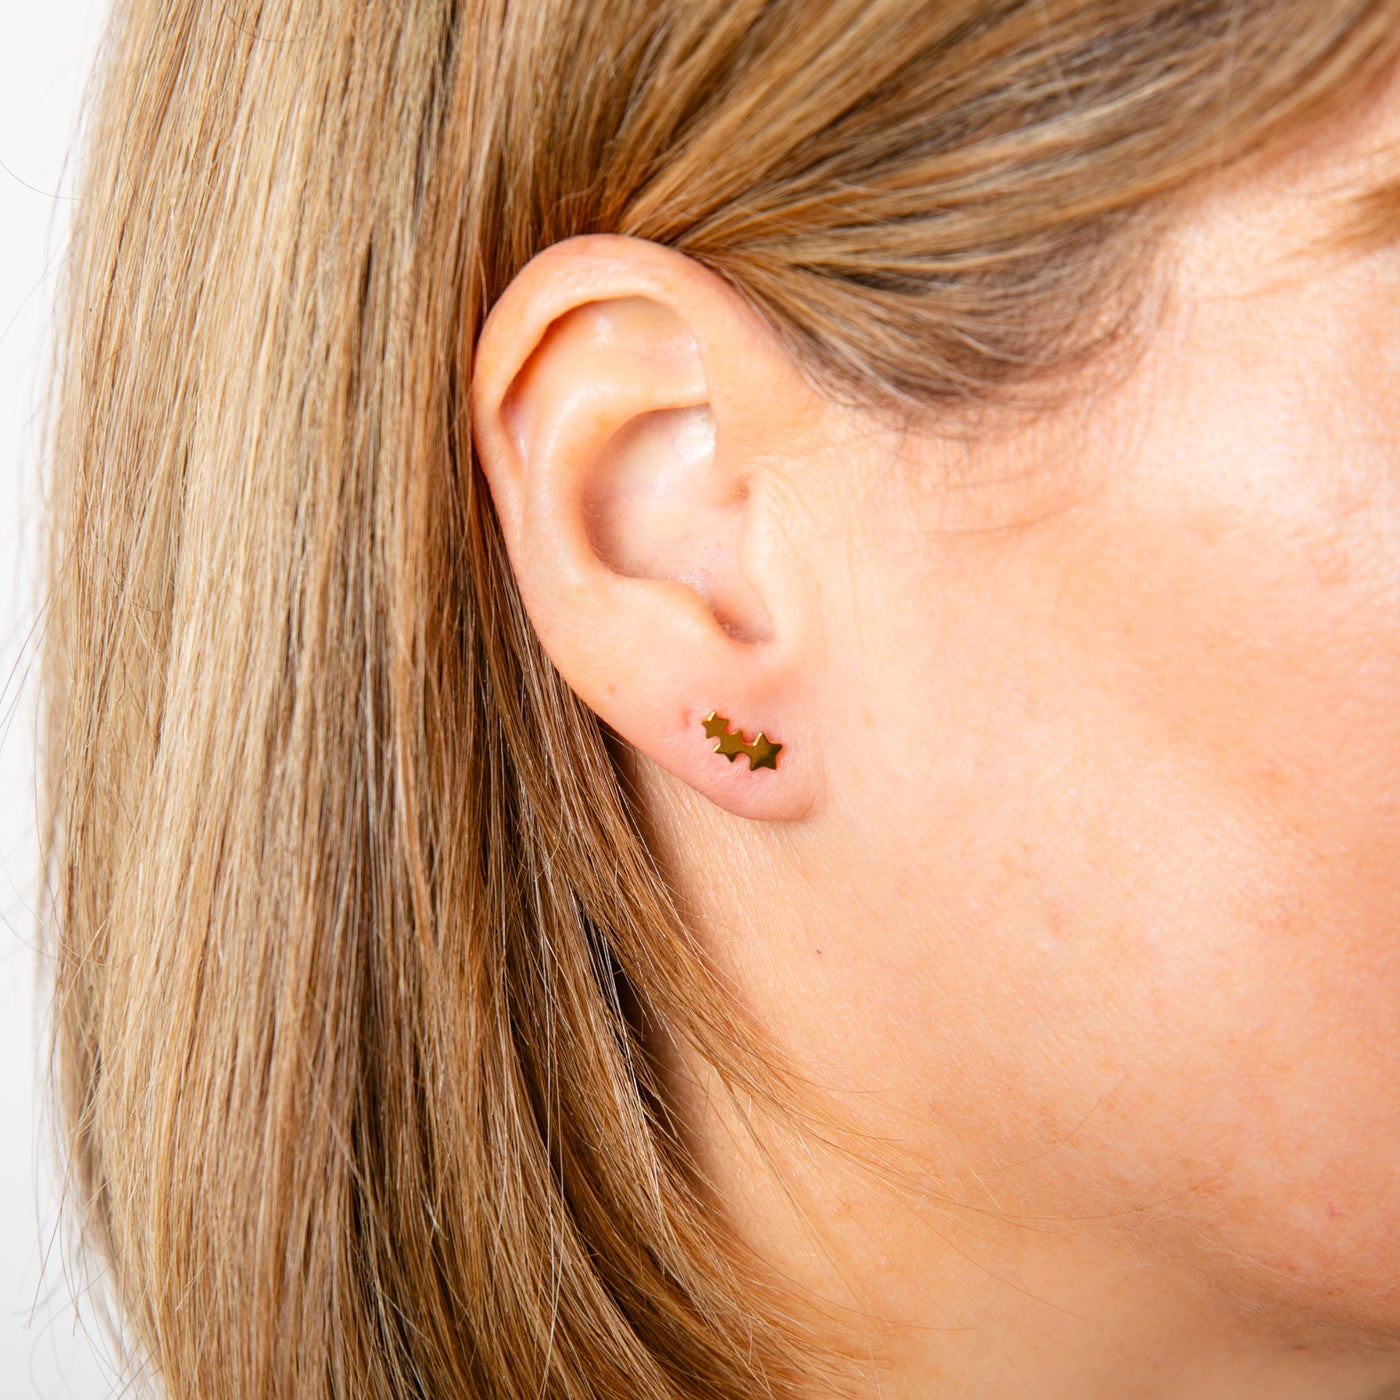 Ava Earrings in gold consisting of three small stars joined together